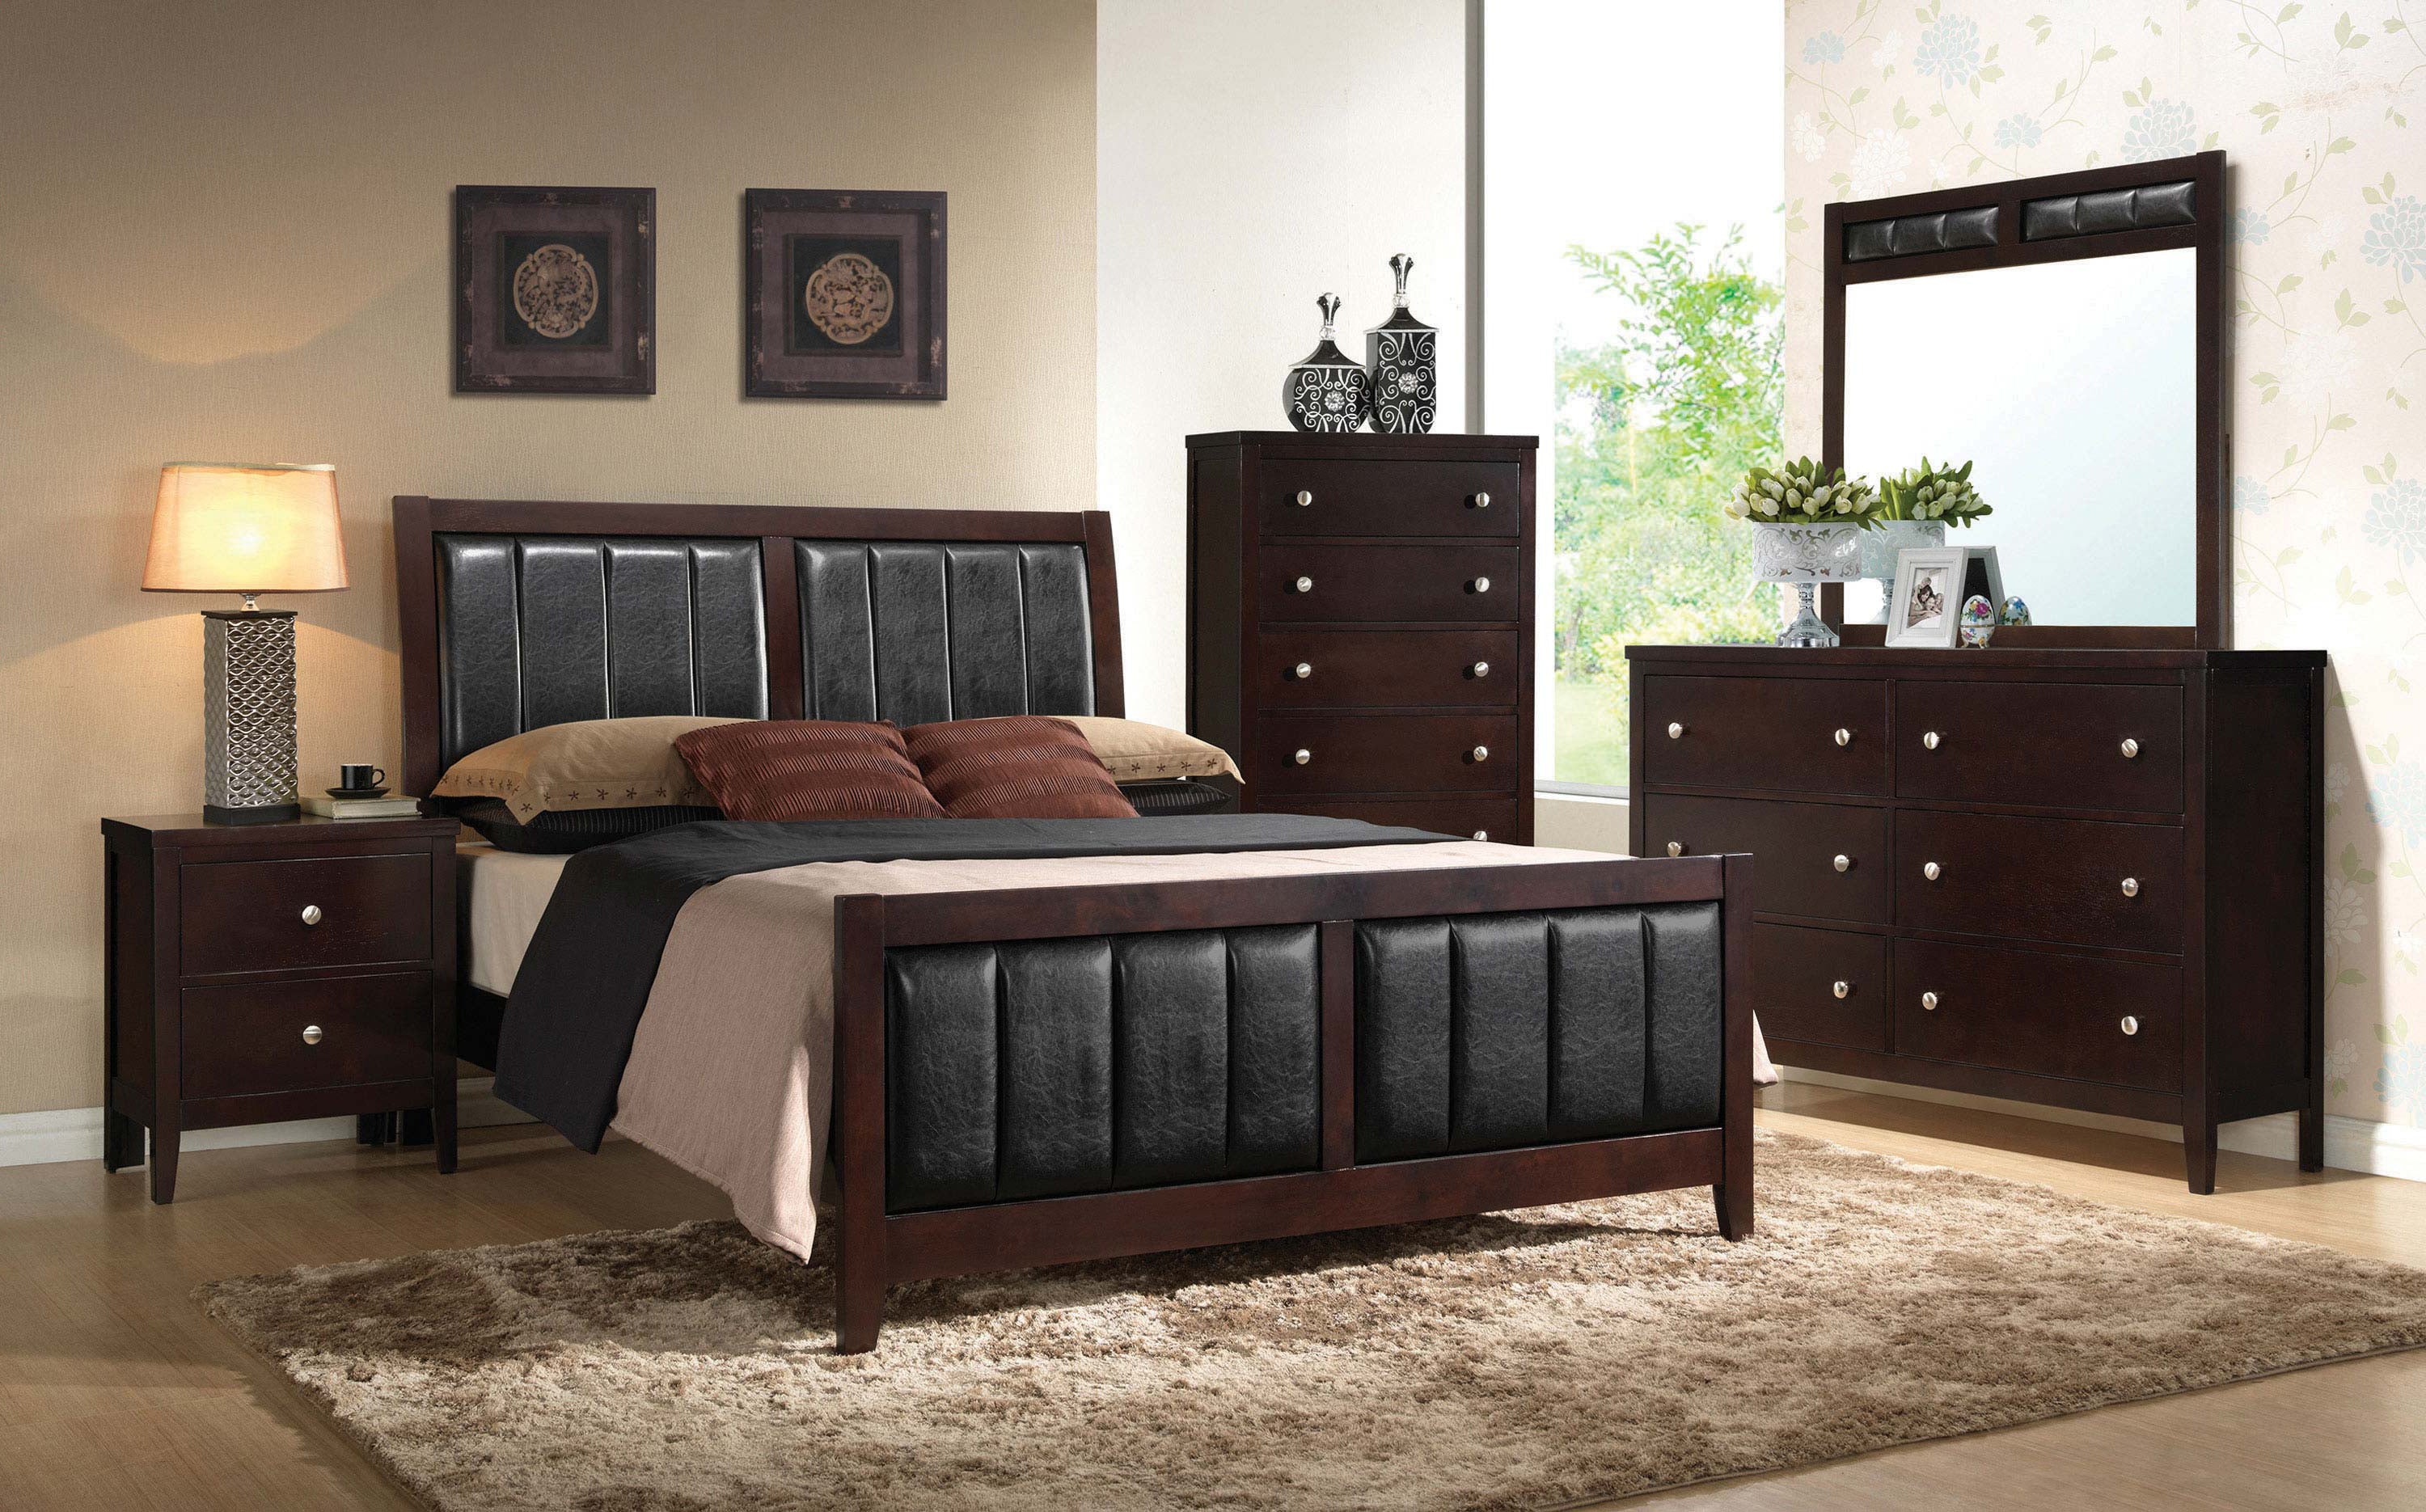 Transitional 4 PC King Bedroom Set with Upholstered Headboard in Cappuccino